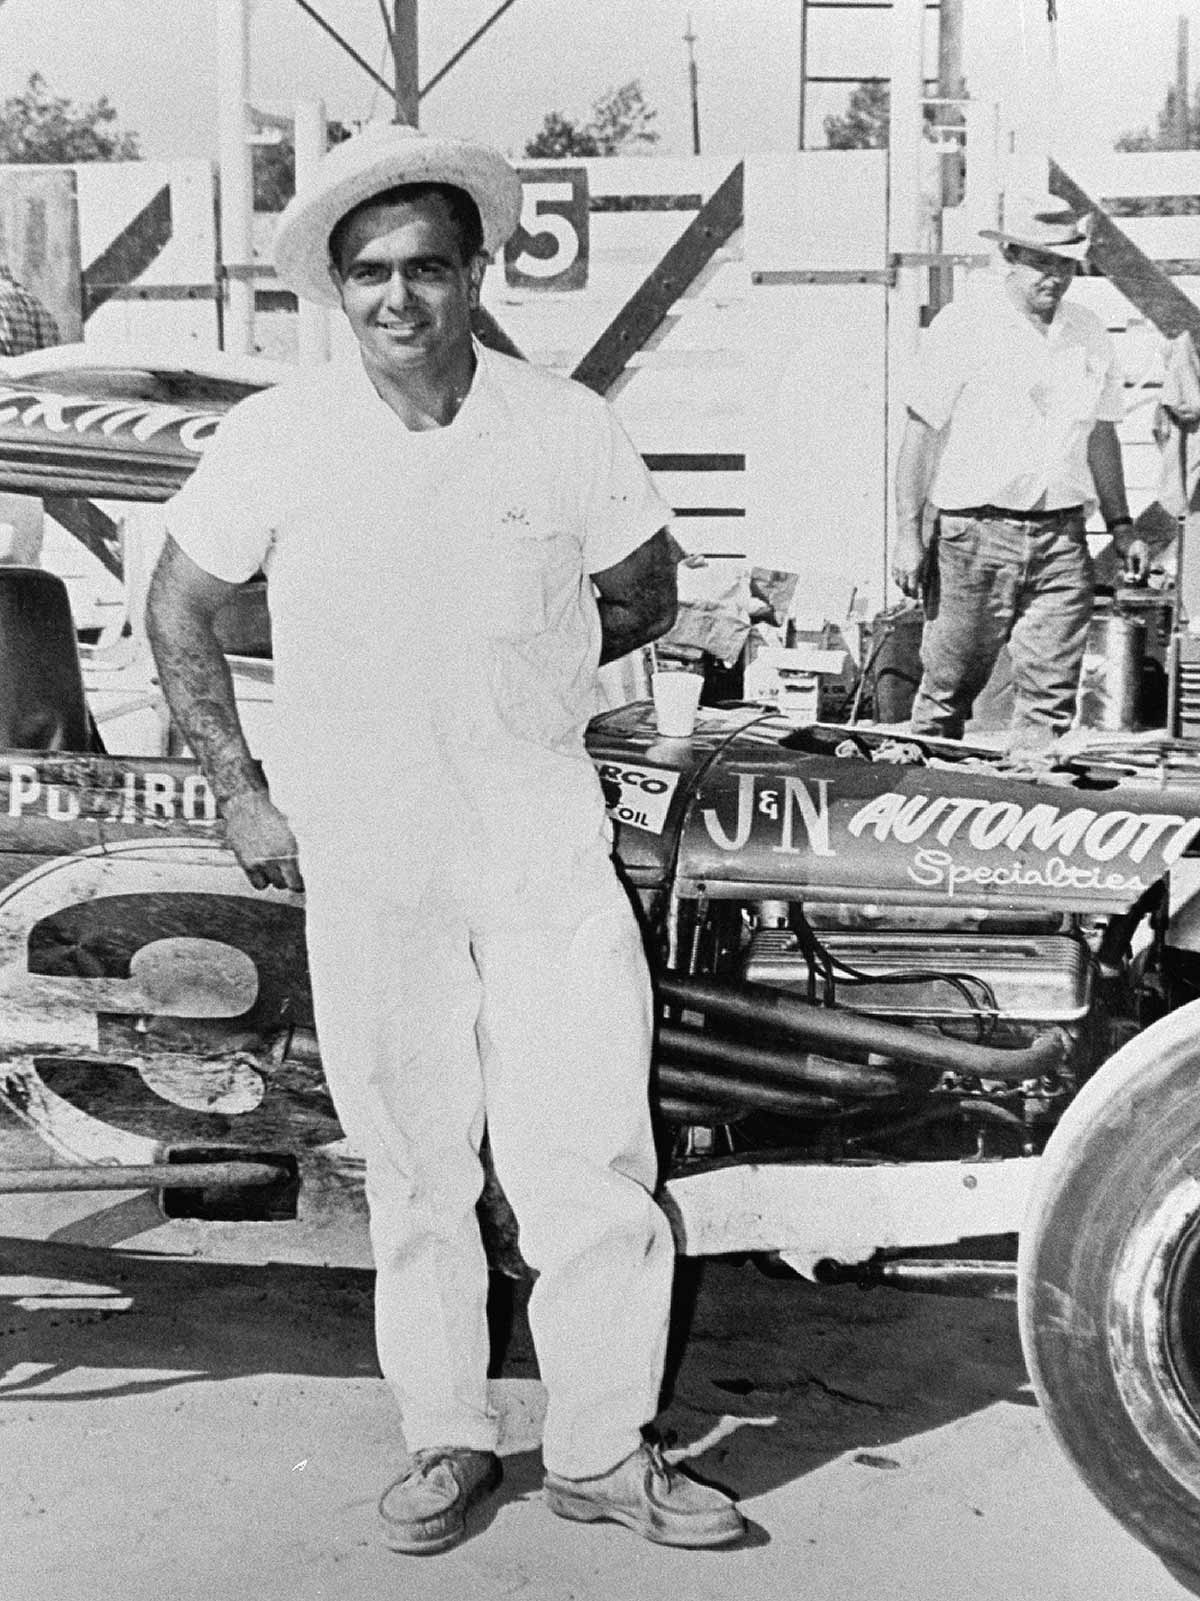 Fresno’s Al Pombo was without a doubt the king of Central Valley